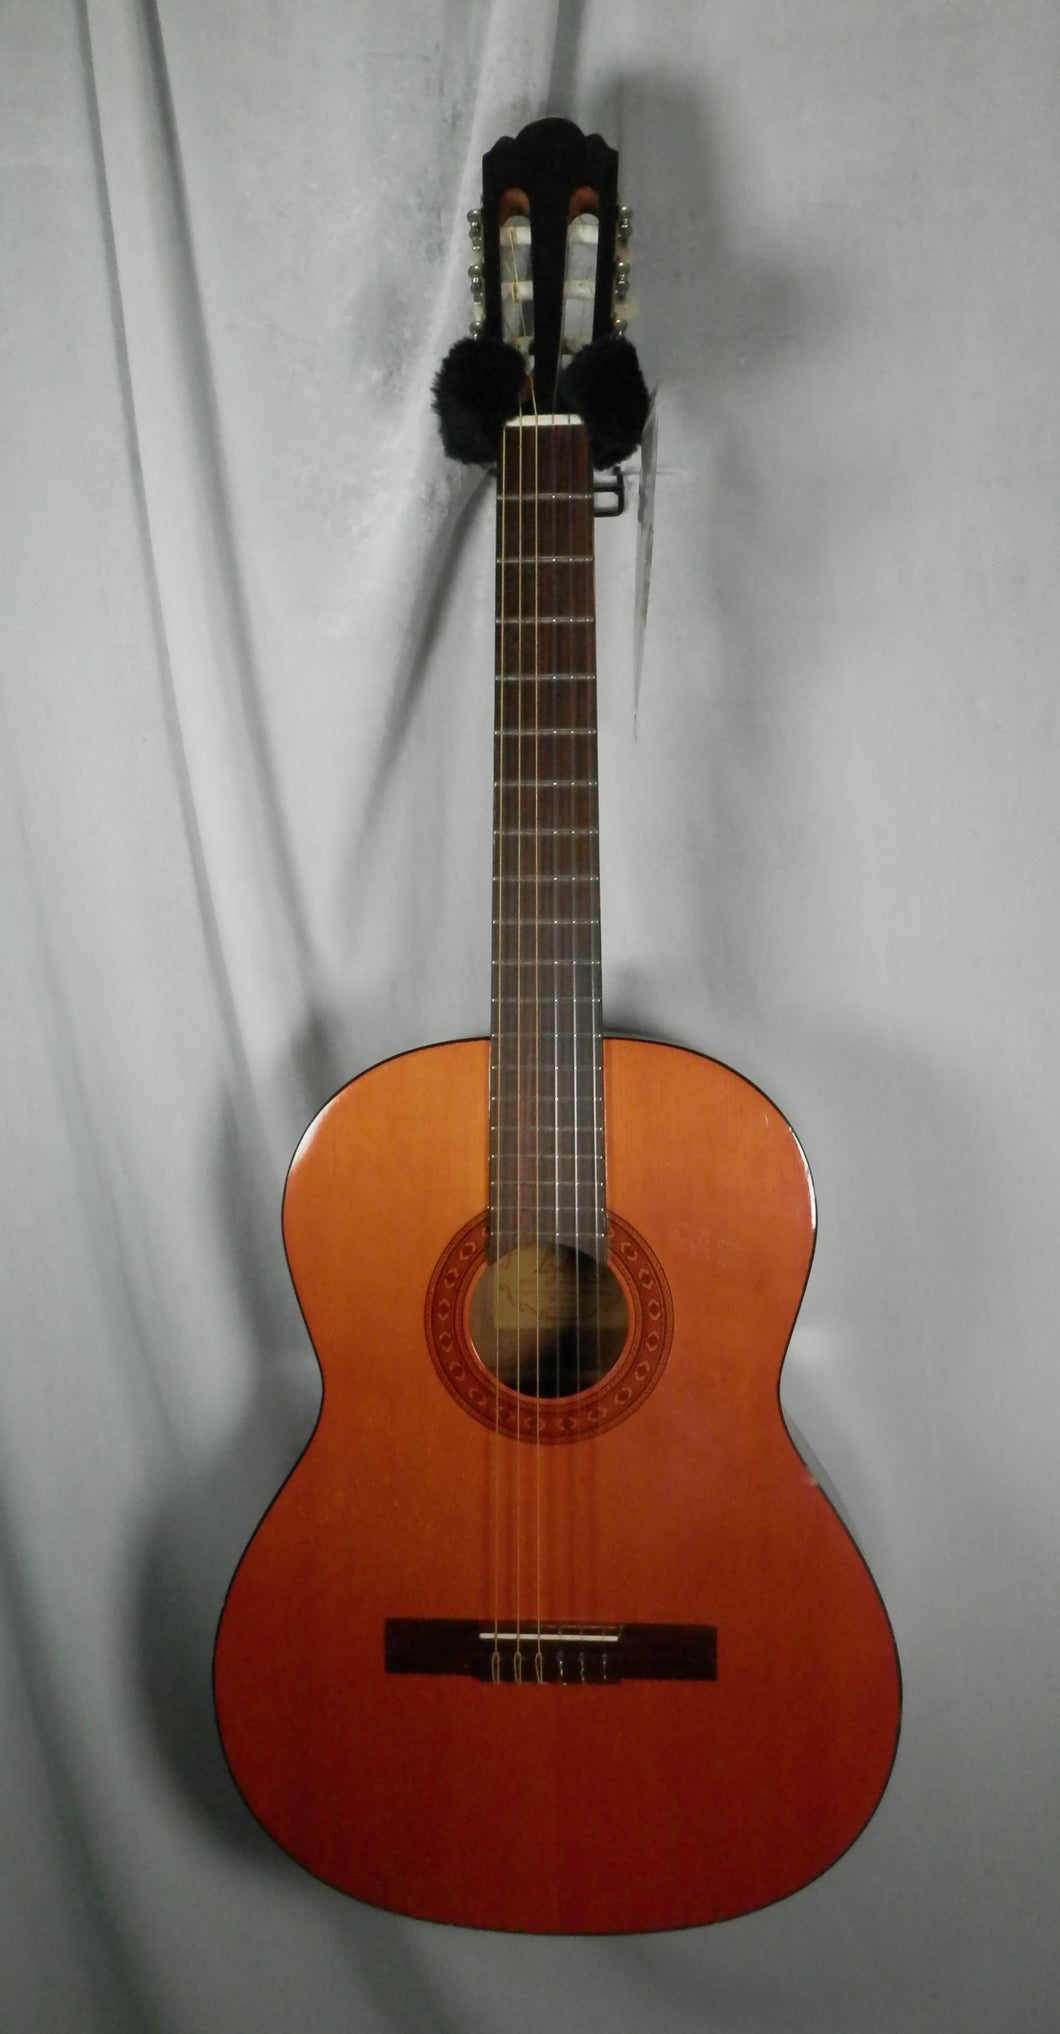 Lyle Model C-610 Classical Nylon String Acoustic Guitar used Made in Japan